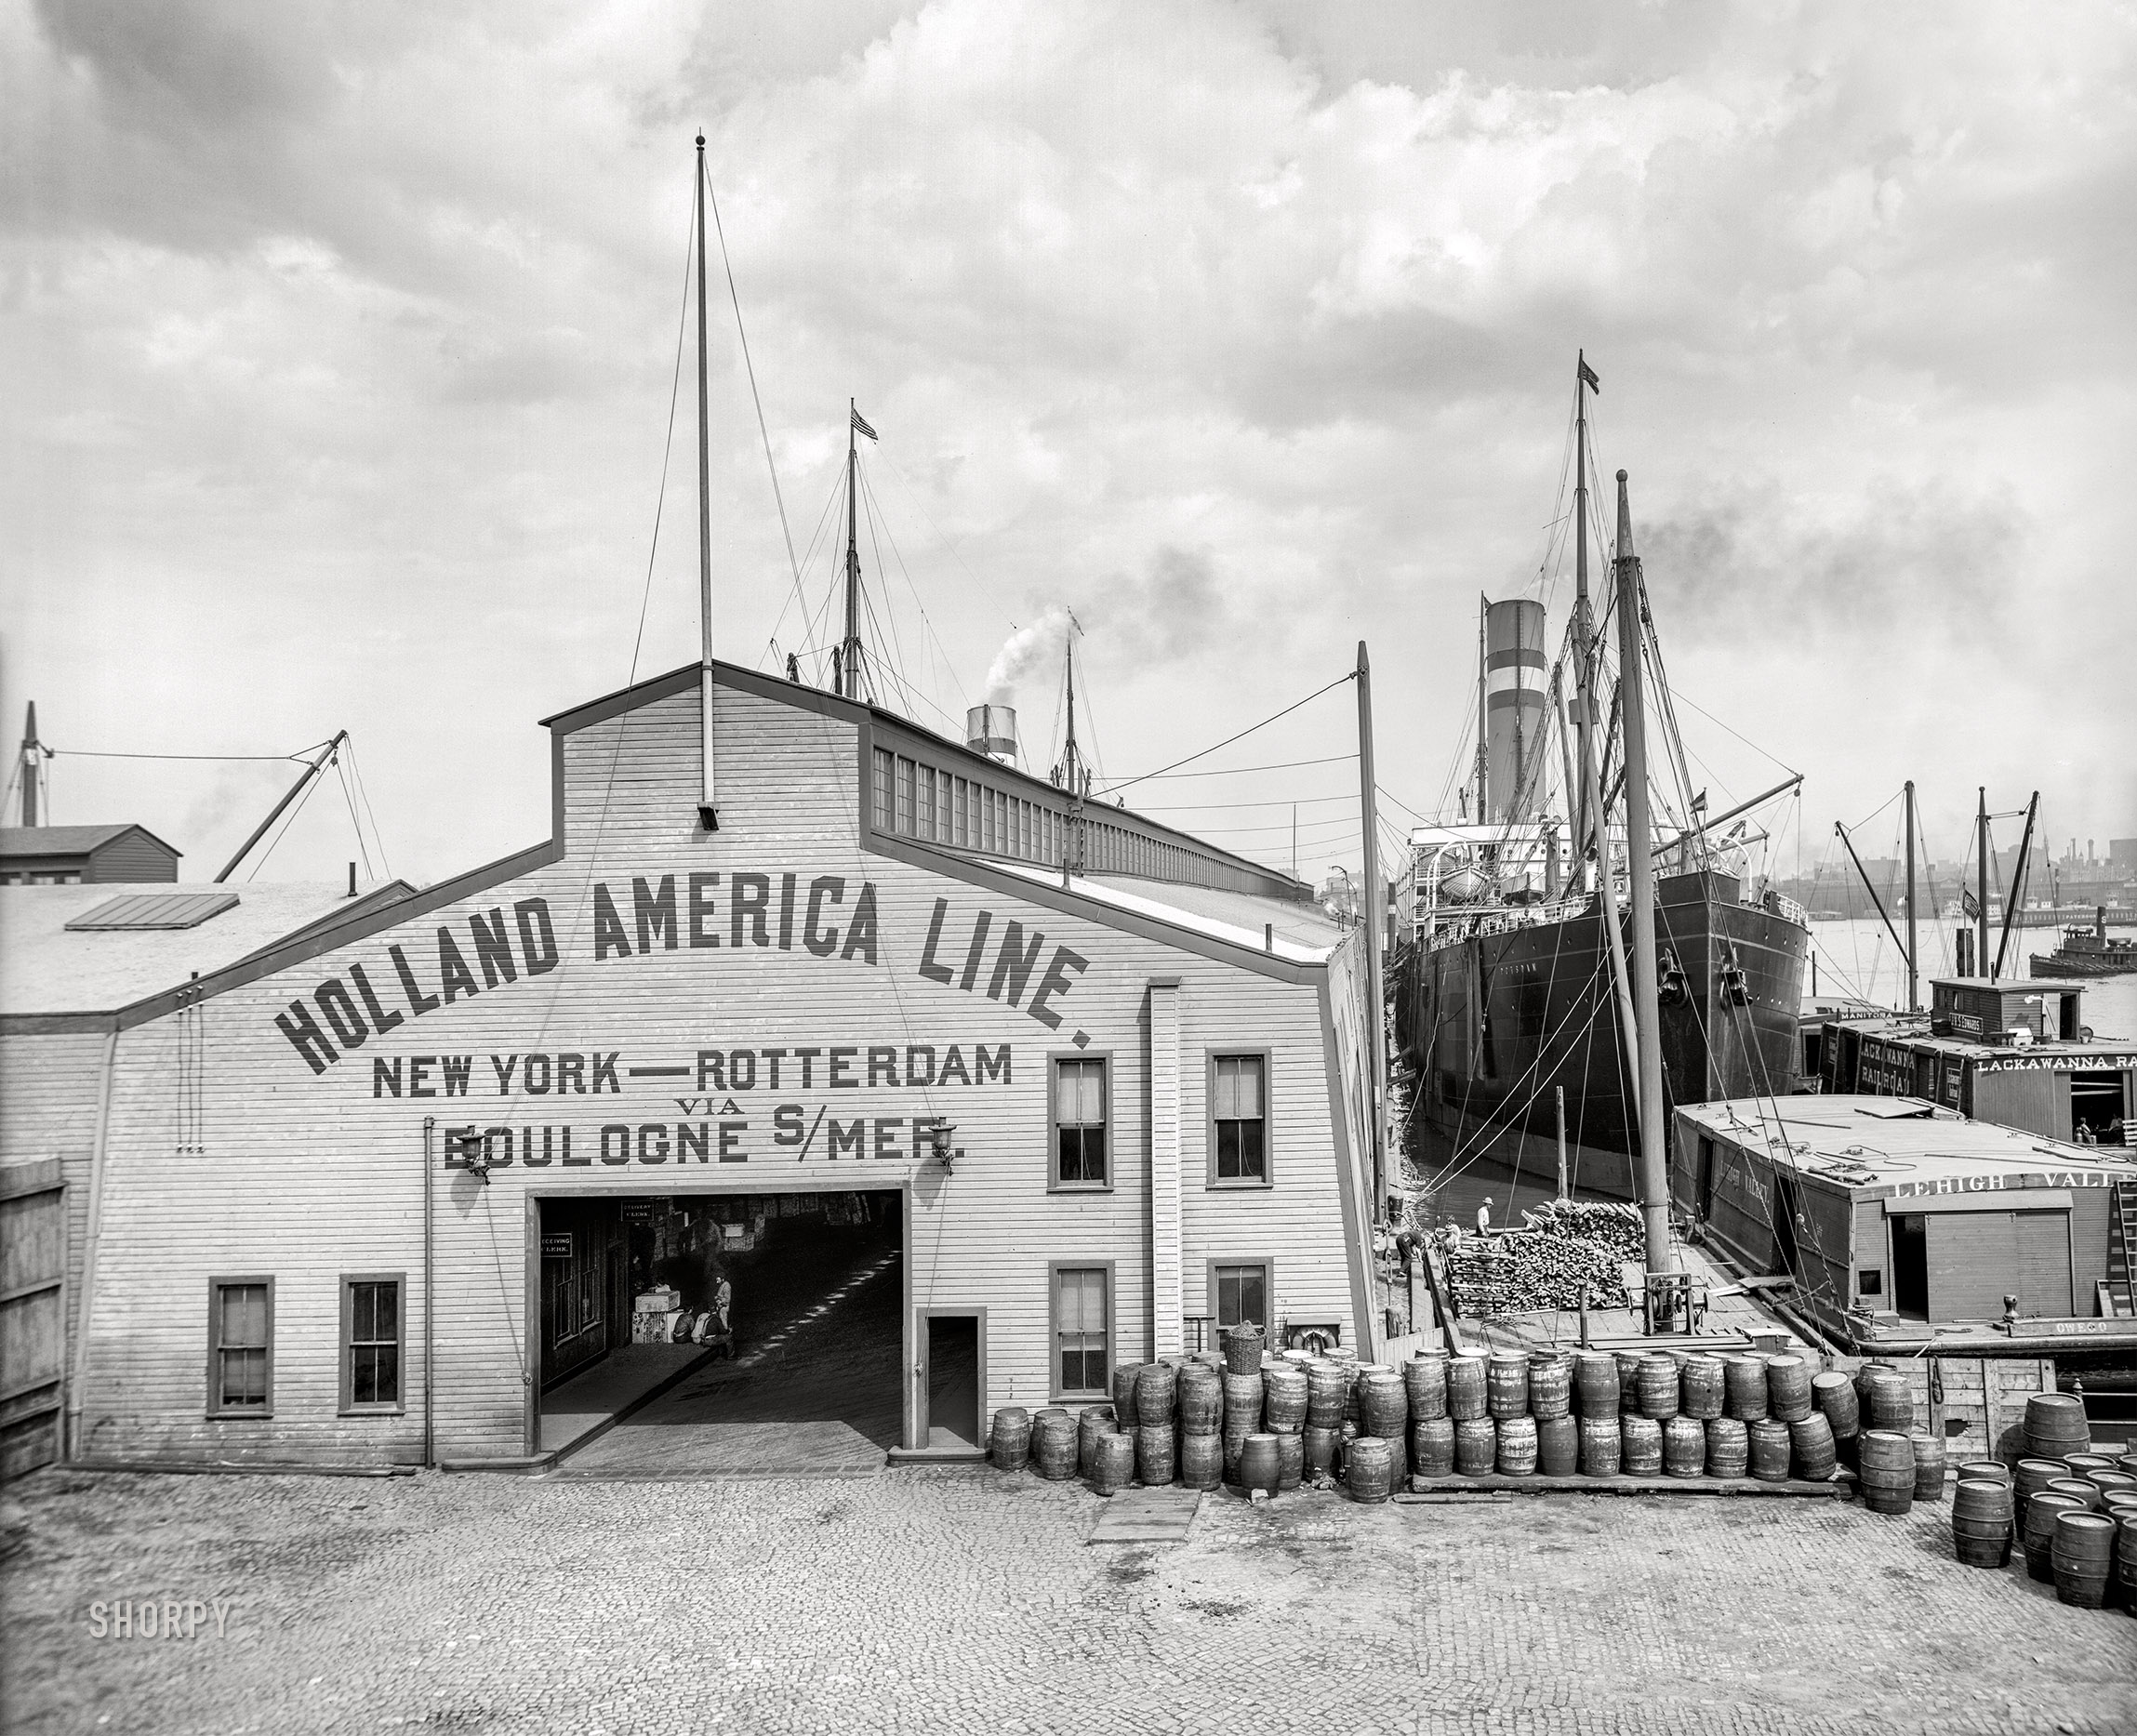 Hoboken, New Jersey, circa 1905. "Entrance to Holland America Line piers." 8x10 inch dry plate glass negative, Detroit Photographic Company. View full size.